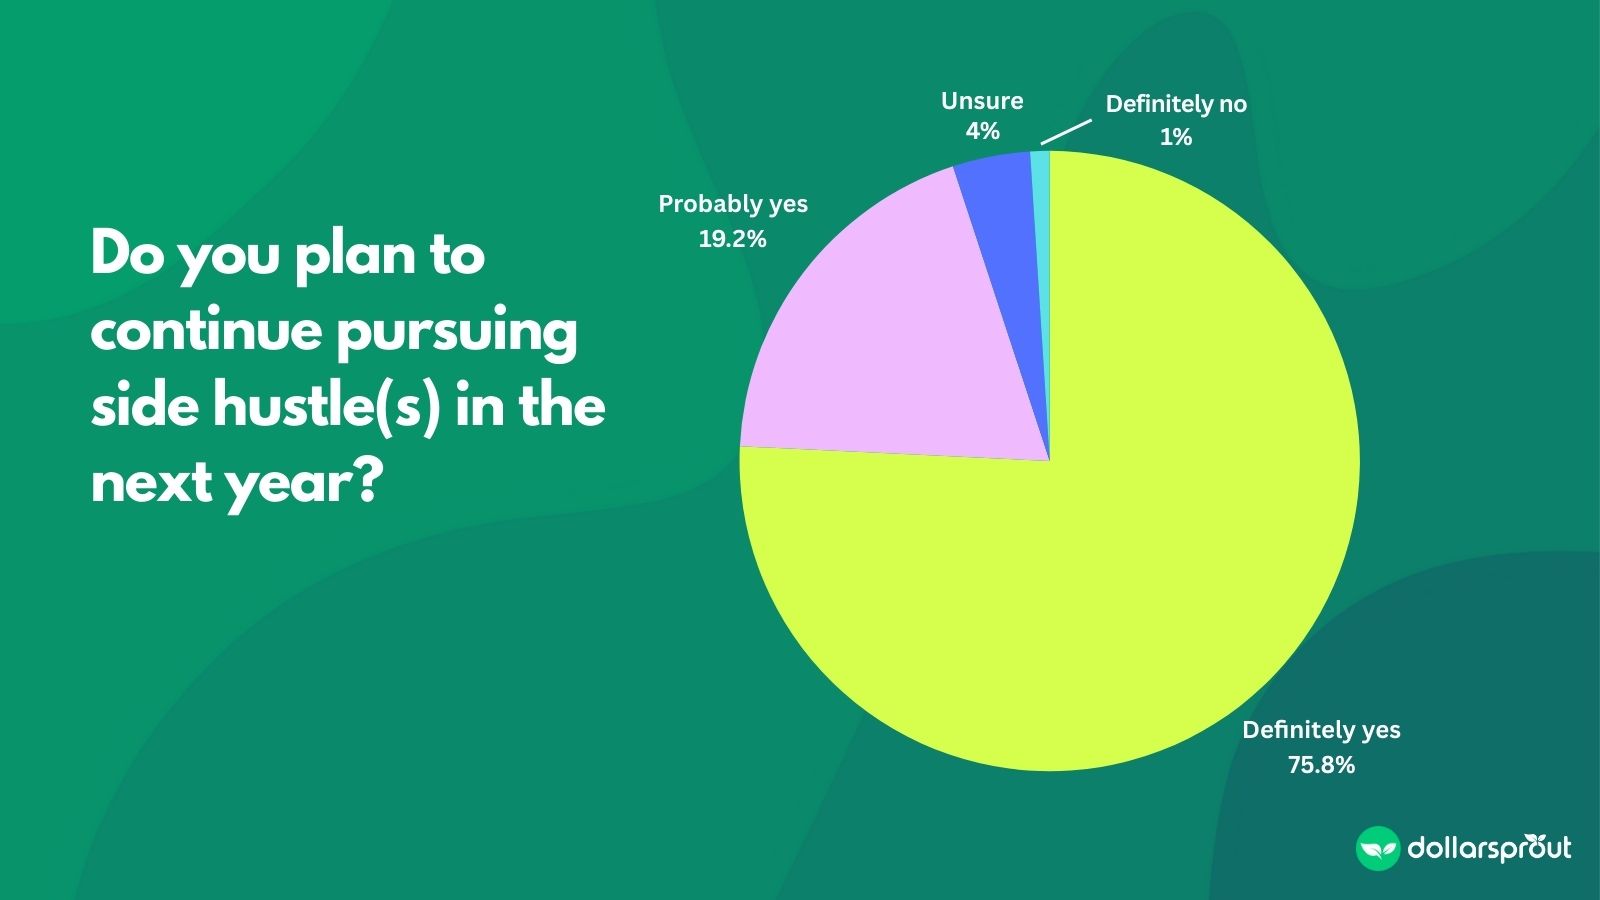 Pie chart showing that the overwhelming majority of people plan on continuing their side hustle this year.